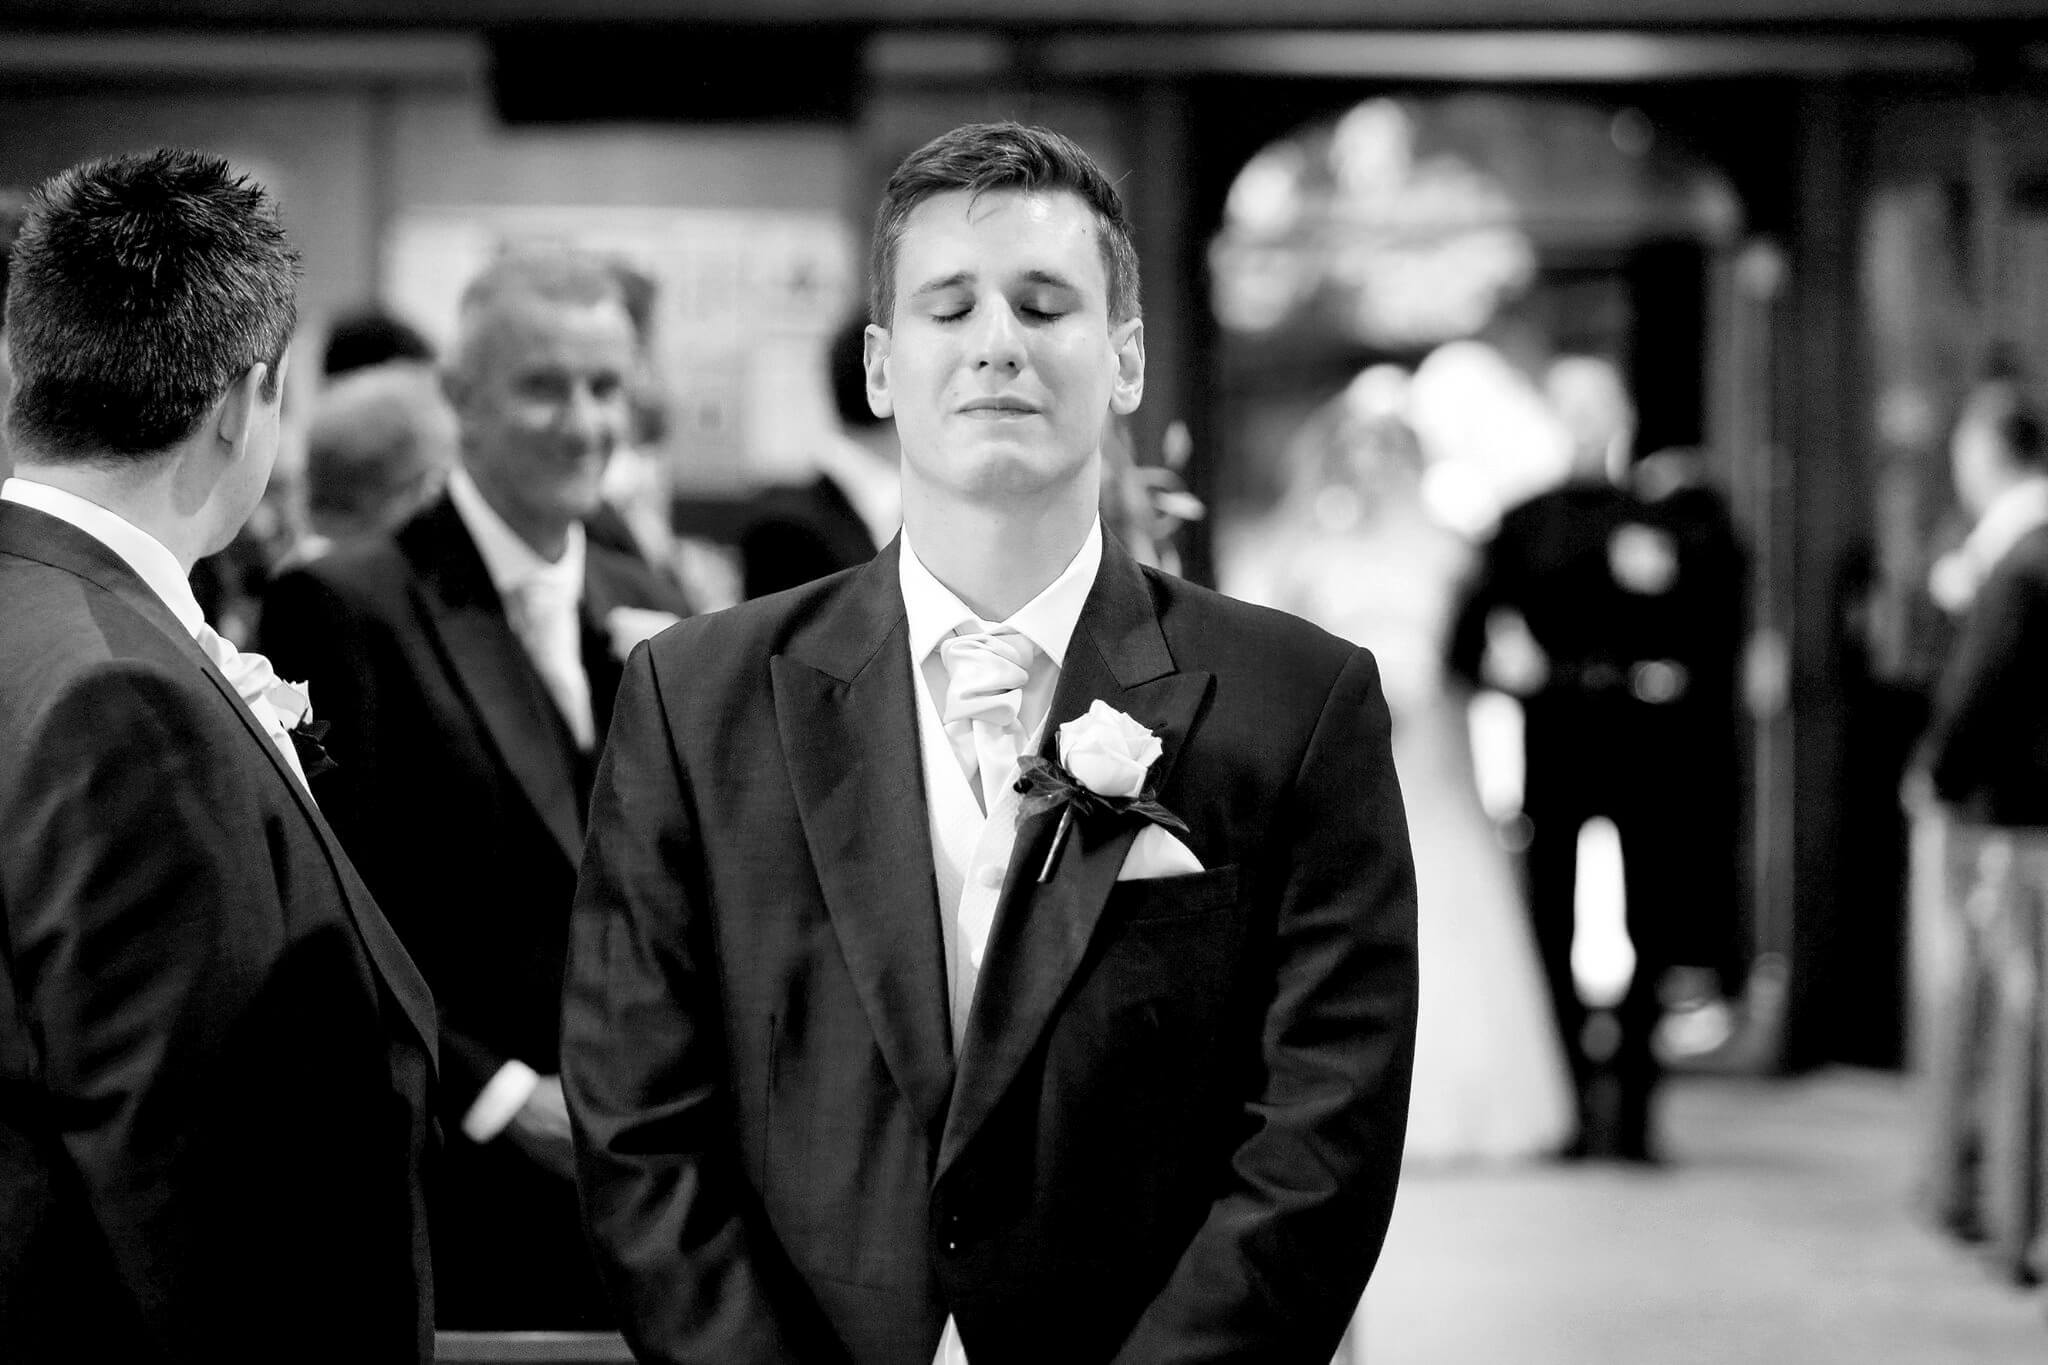 The emotions of a wedding ceremony candid wedding photography